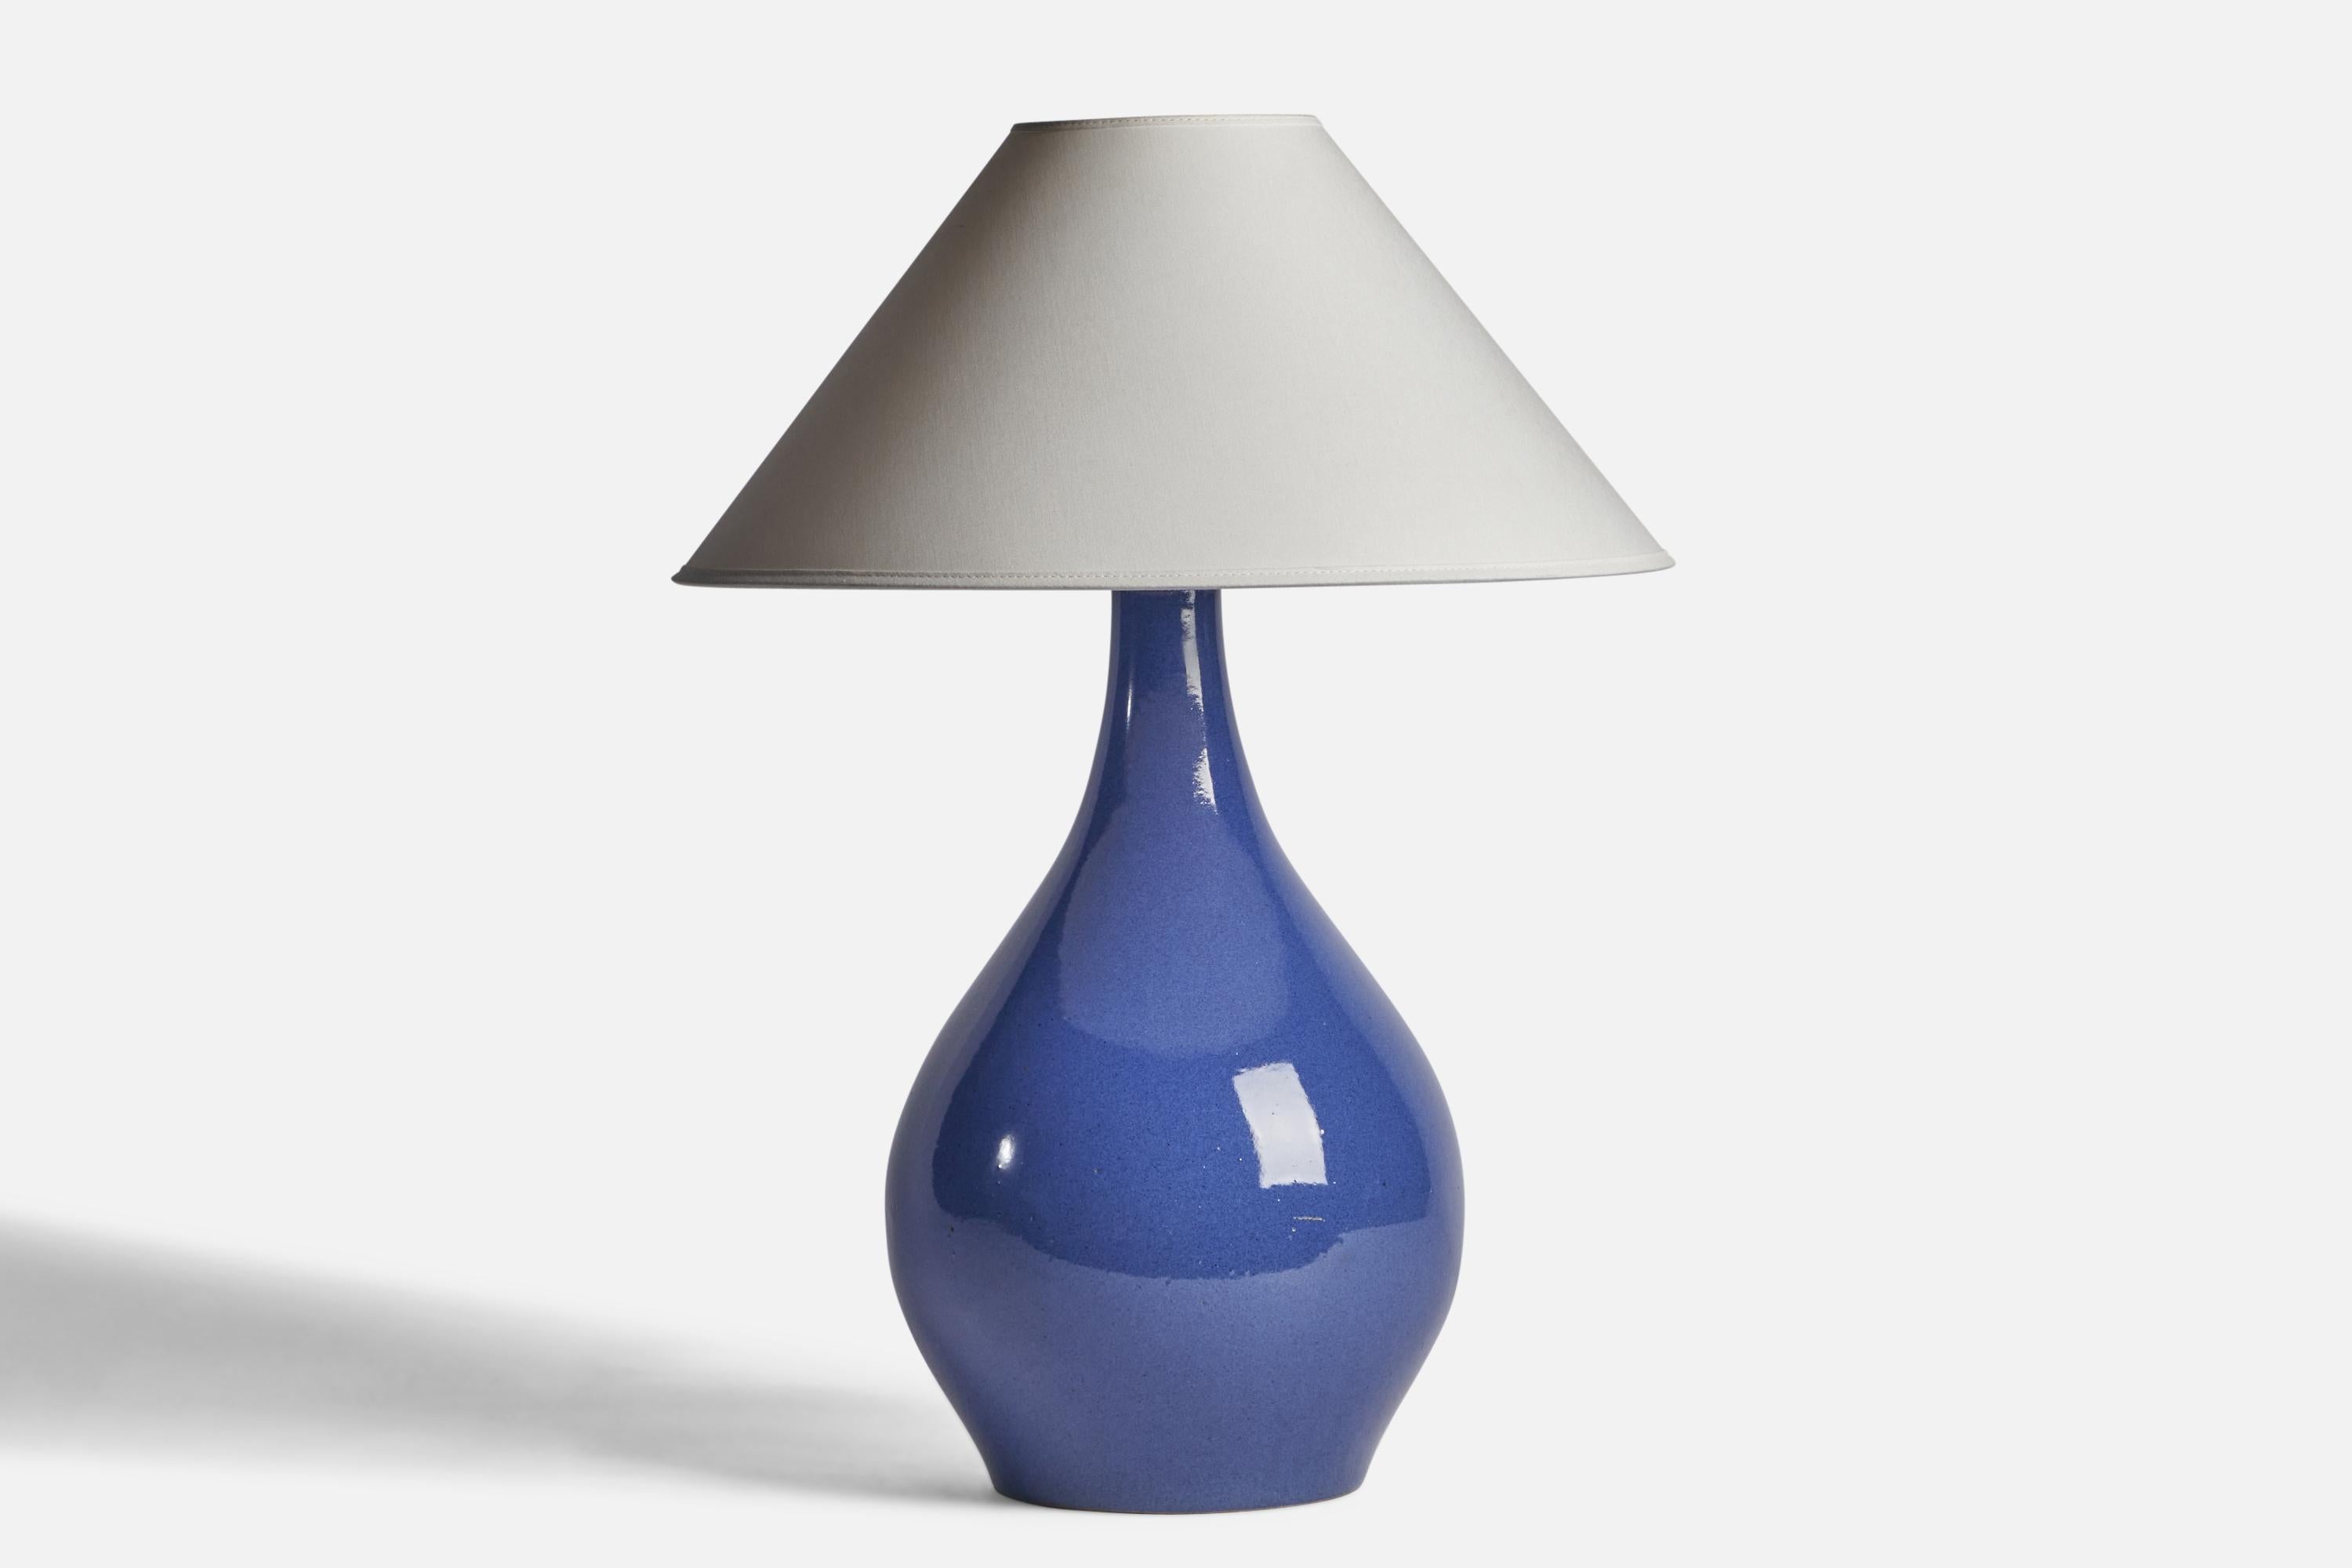 A blue-glazed ceramic table lamp designed by Jane & Gordon Martz and produced by Marshall Studios, USA, 1960s.

Dimensions of Lamp (inches): 17.75” H x 9.5” Diameter
Dimensions of Shade (inches): 4.5” Top Diameter x 16” Bottom Diameter x 7.25”